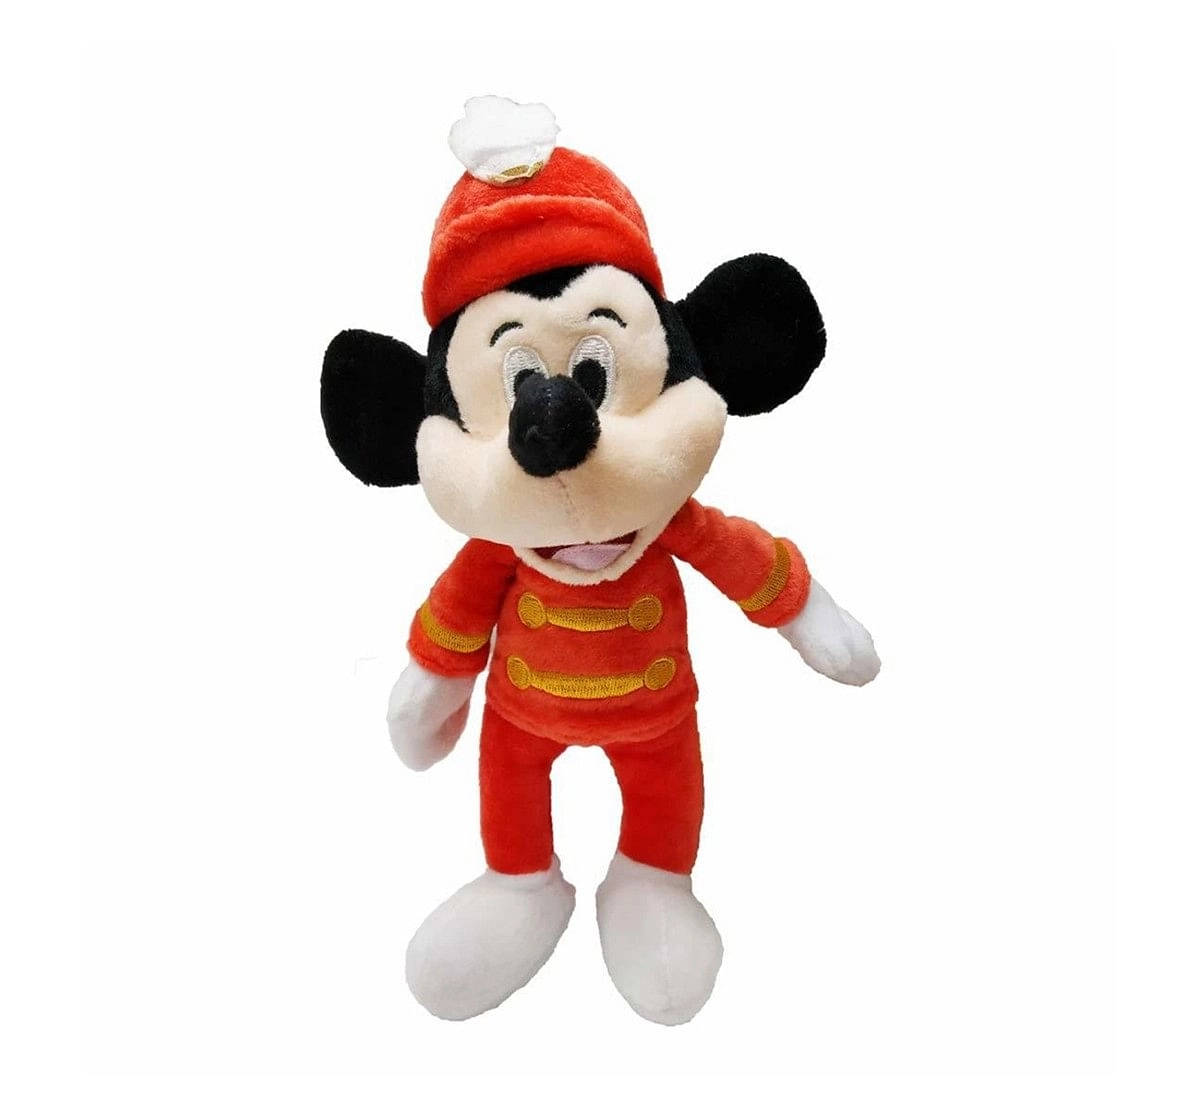 Disney Mouseketeers Mickey 15 Cm Soft Toy for Kids age 1Y+